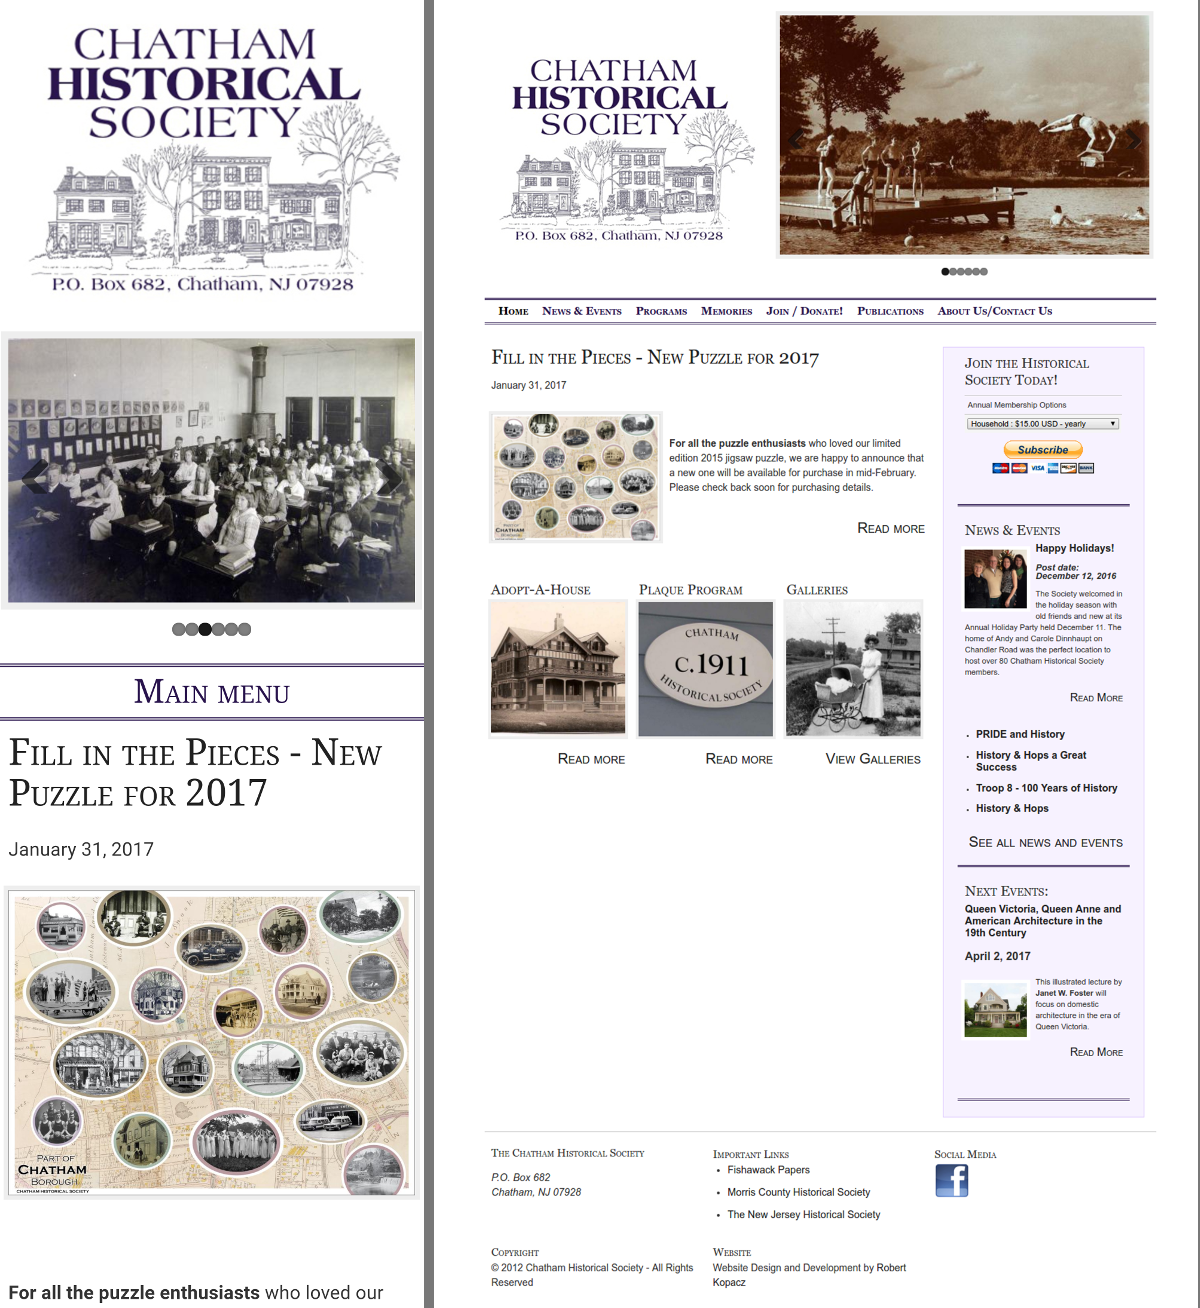 The Chatham Historical Society website, mobile and desktop versions